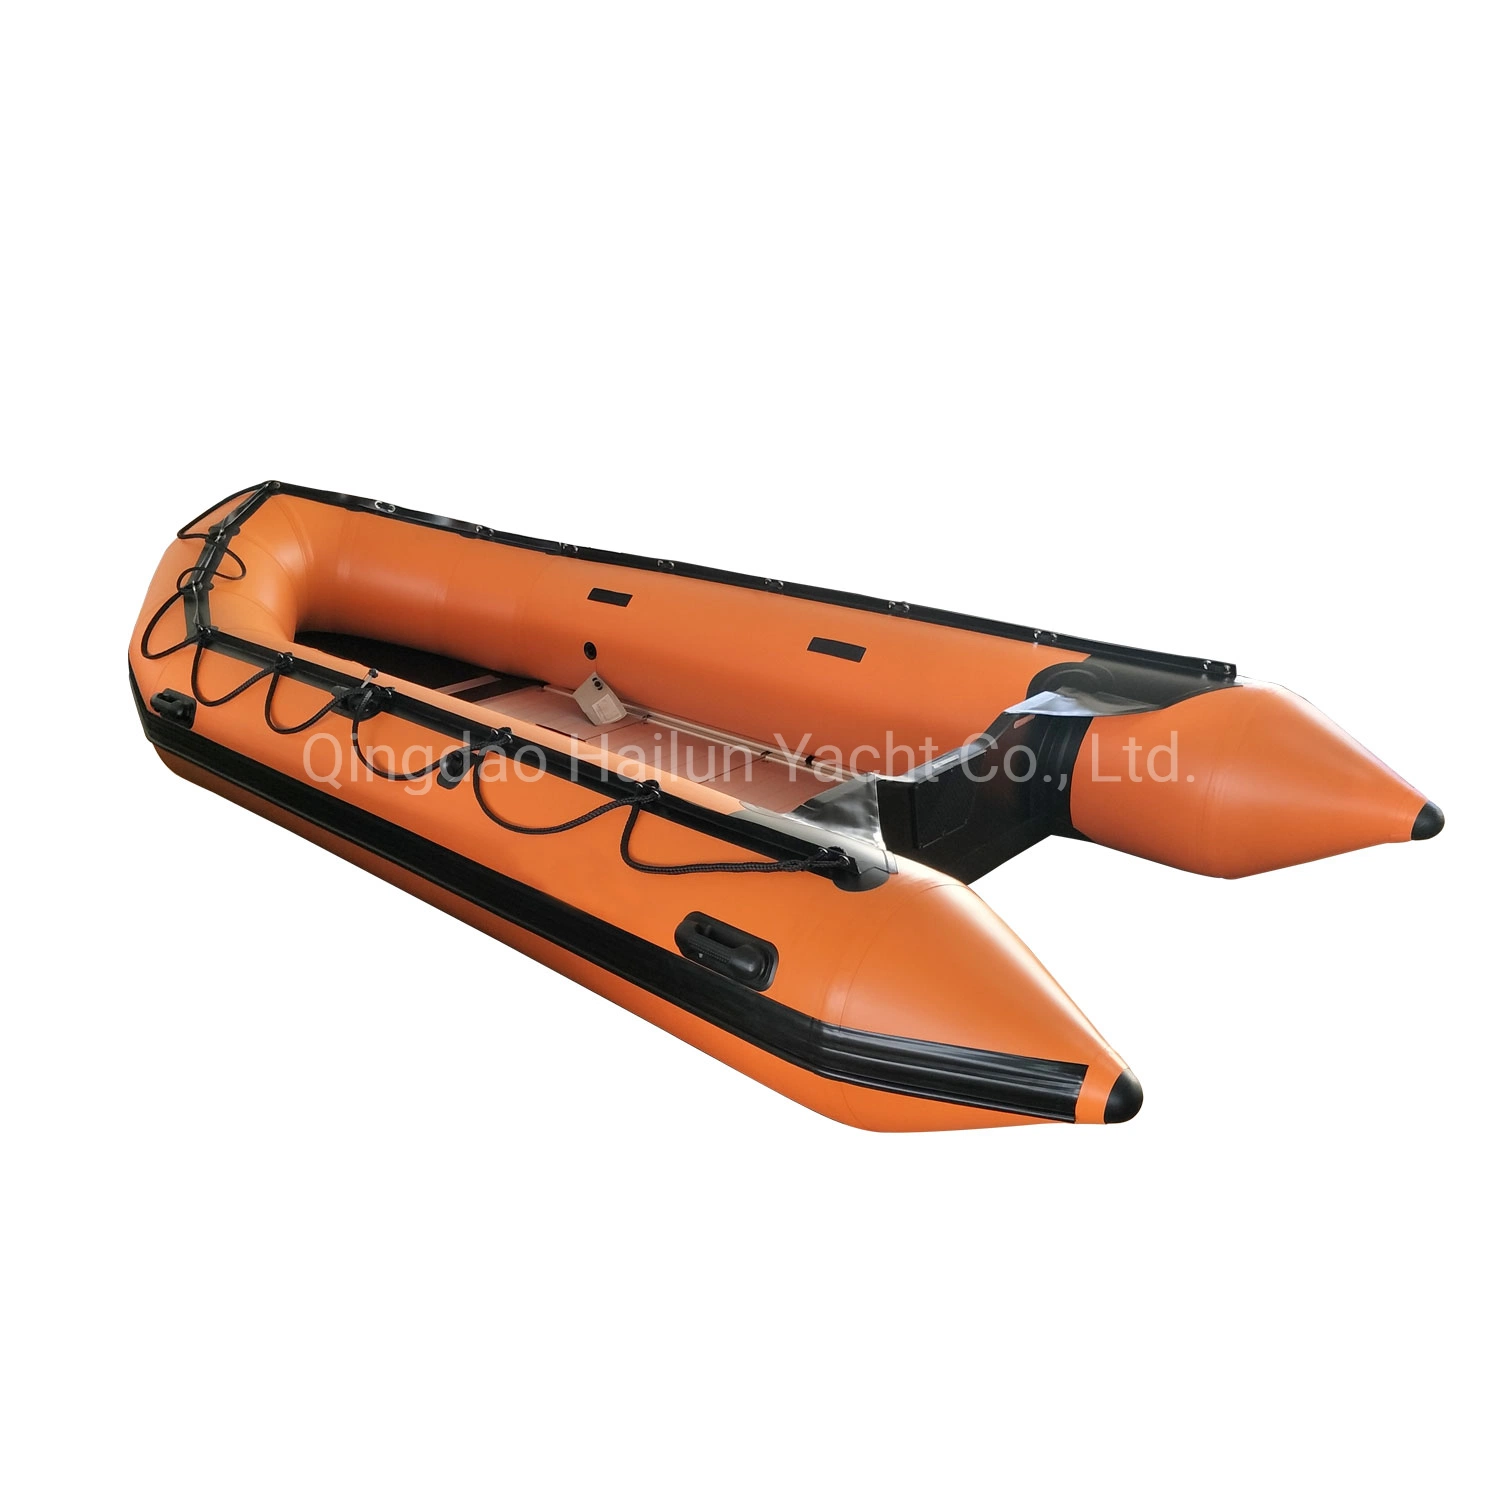 Inflatable Fishing Boat Inflatable Raft Boat Rowing Boat Motor Boat Sport Boat